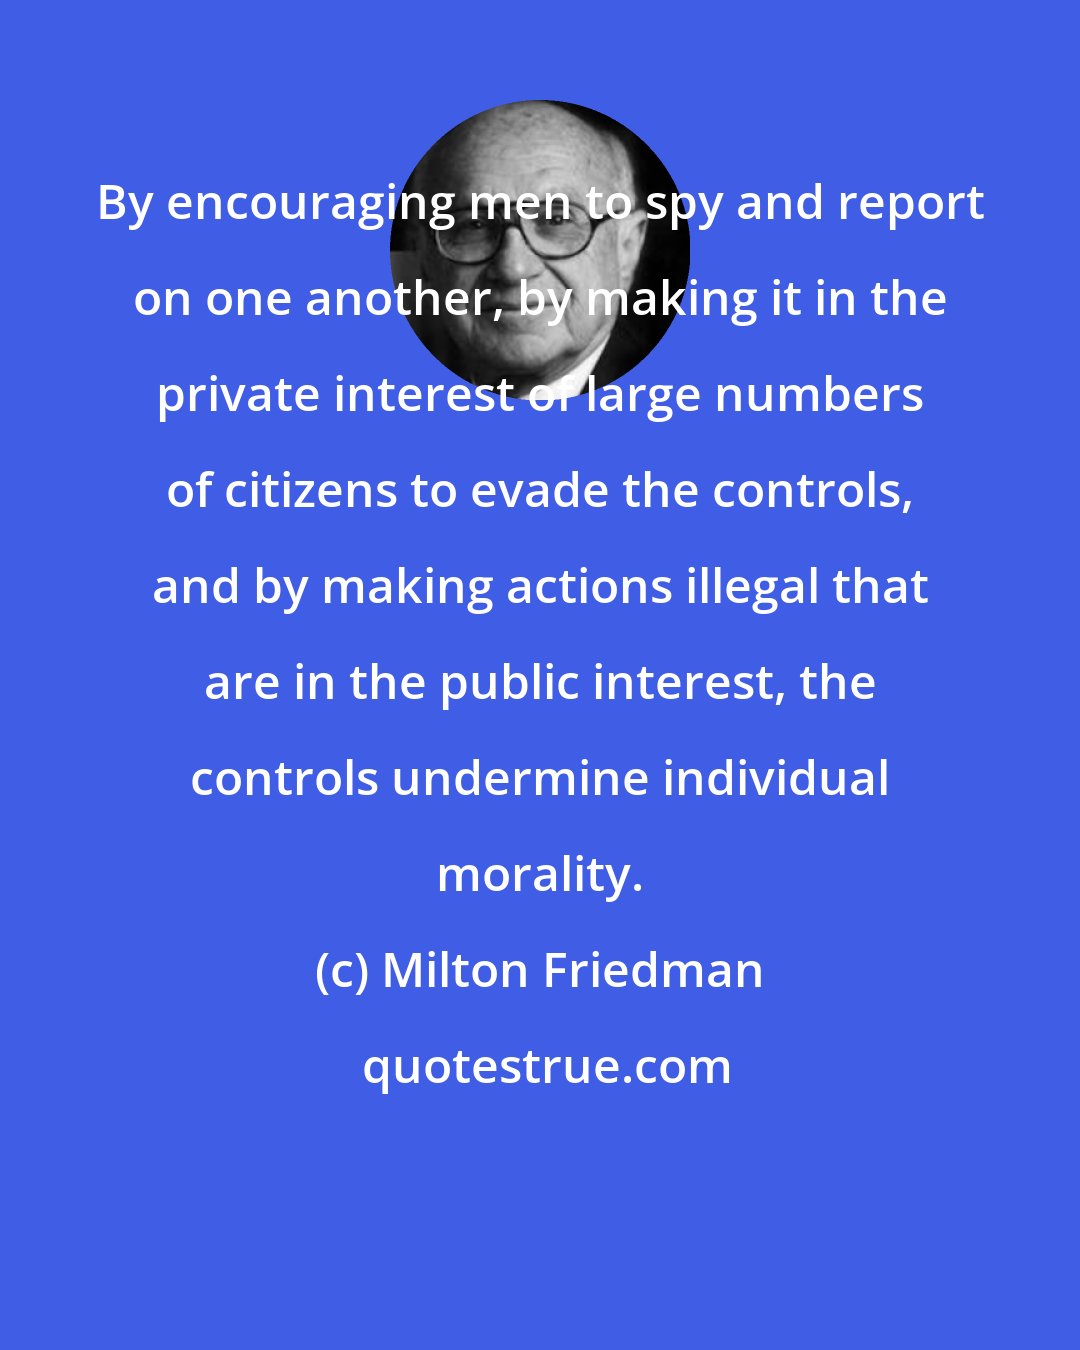 Milton Friedman: By encouraging men to spy and report on one another, by making it in the private interest of large numbers of citizens to evade the controls, and by making actions illegal that are in the public interest, the controls undermine individual morality.